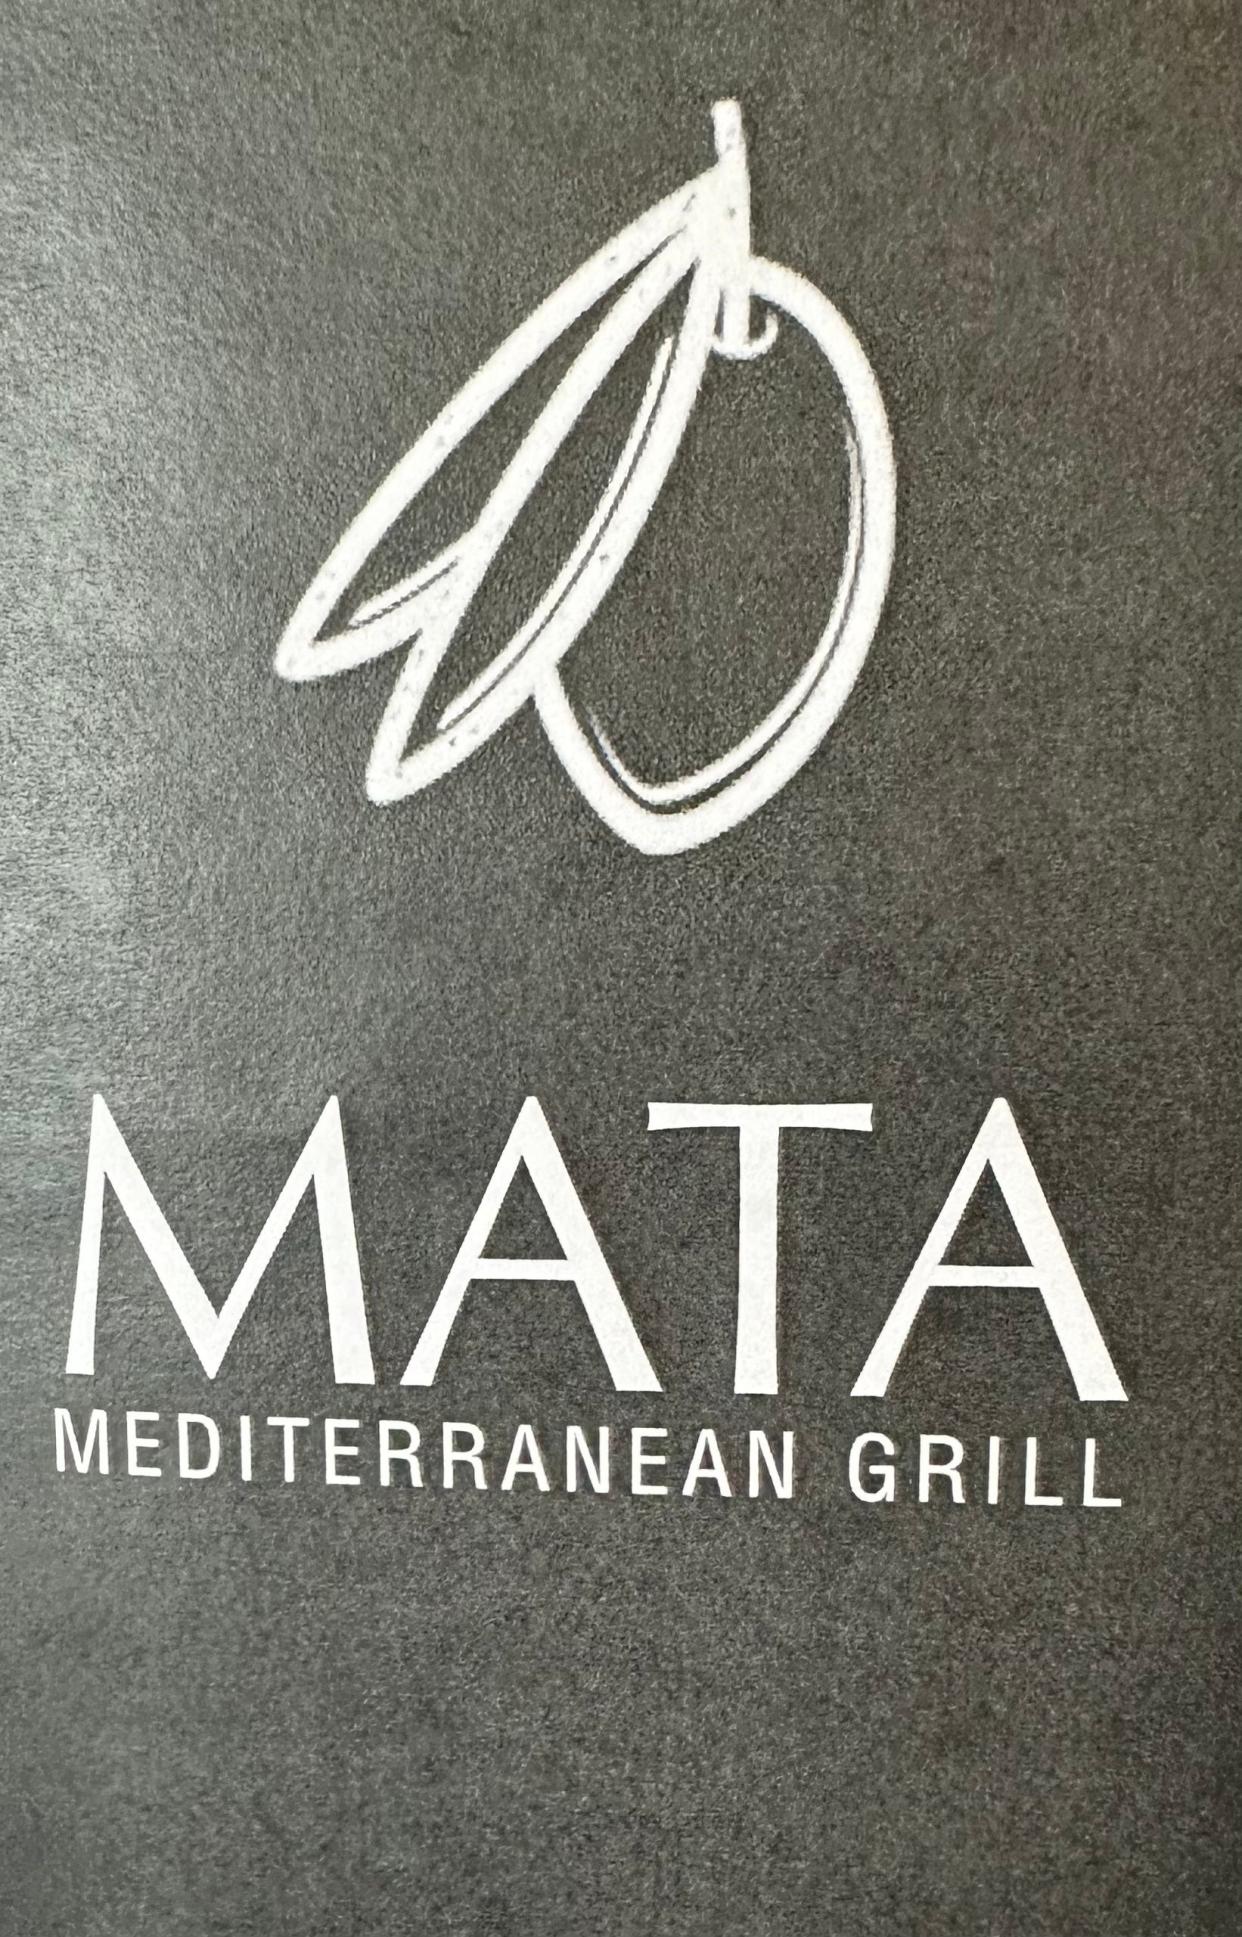 MATA Mediterranean Grill in Jackson Township offers a wide variety of options for lunch and dinner.